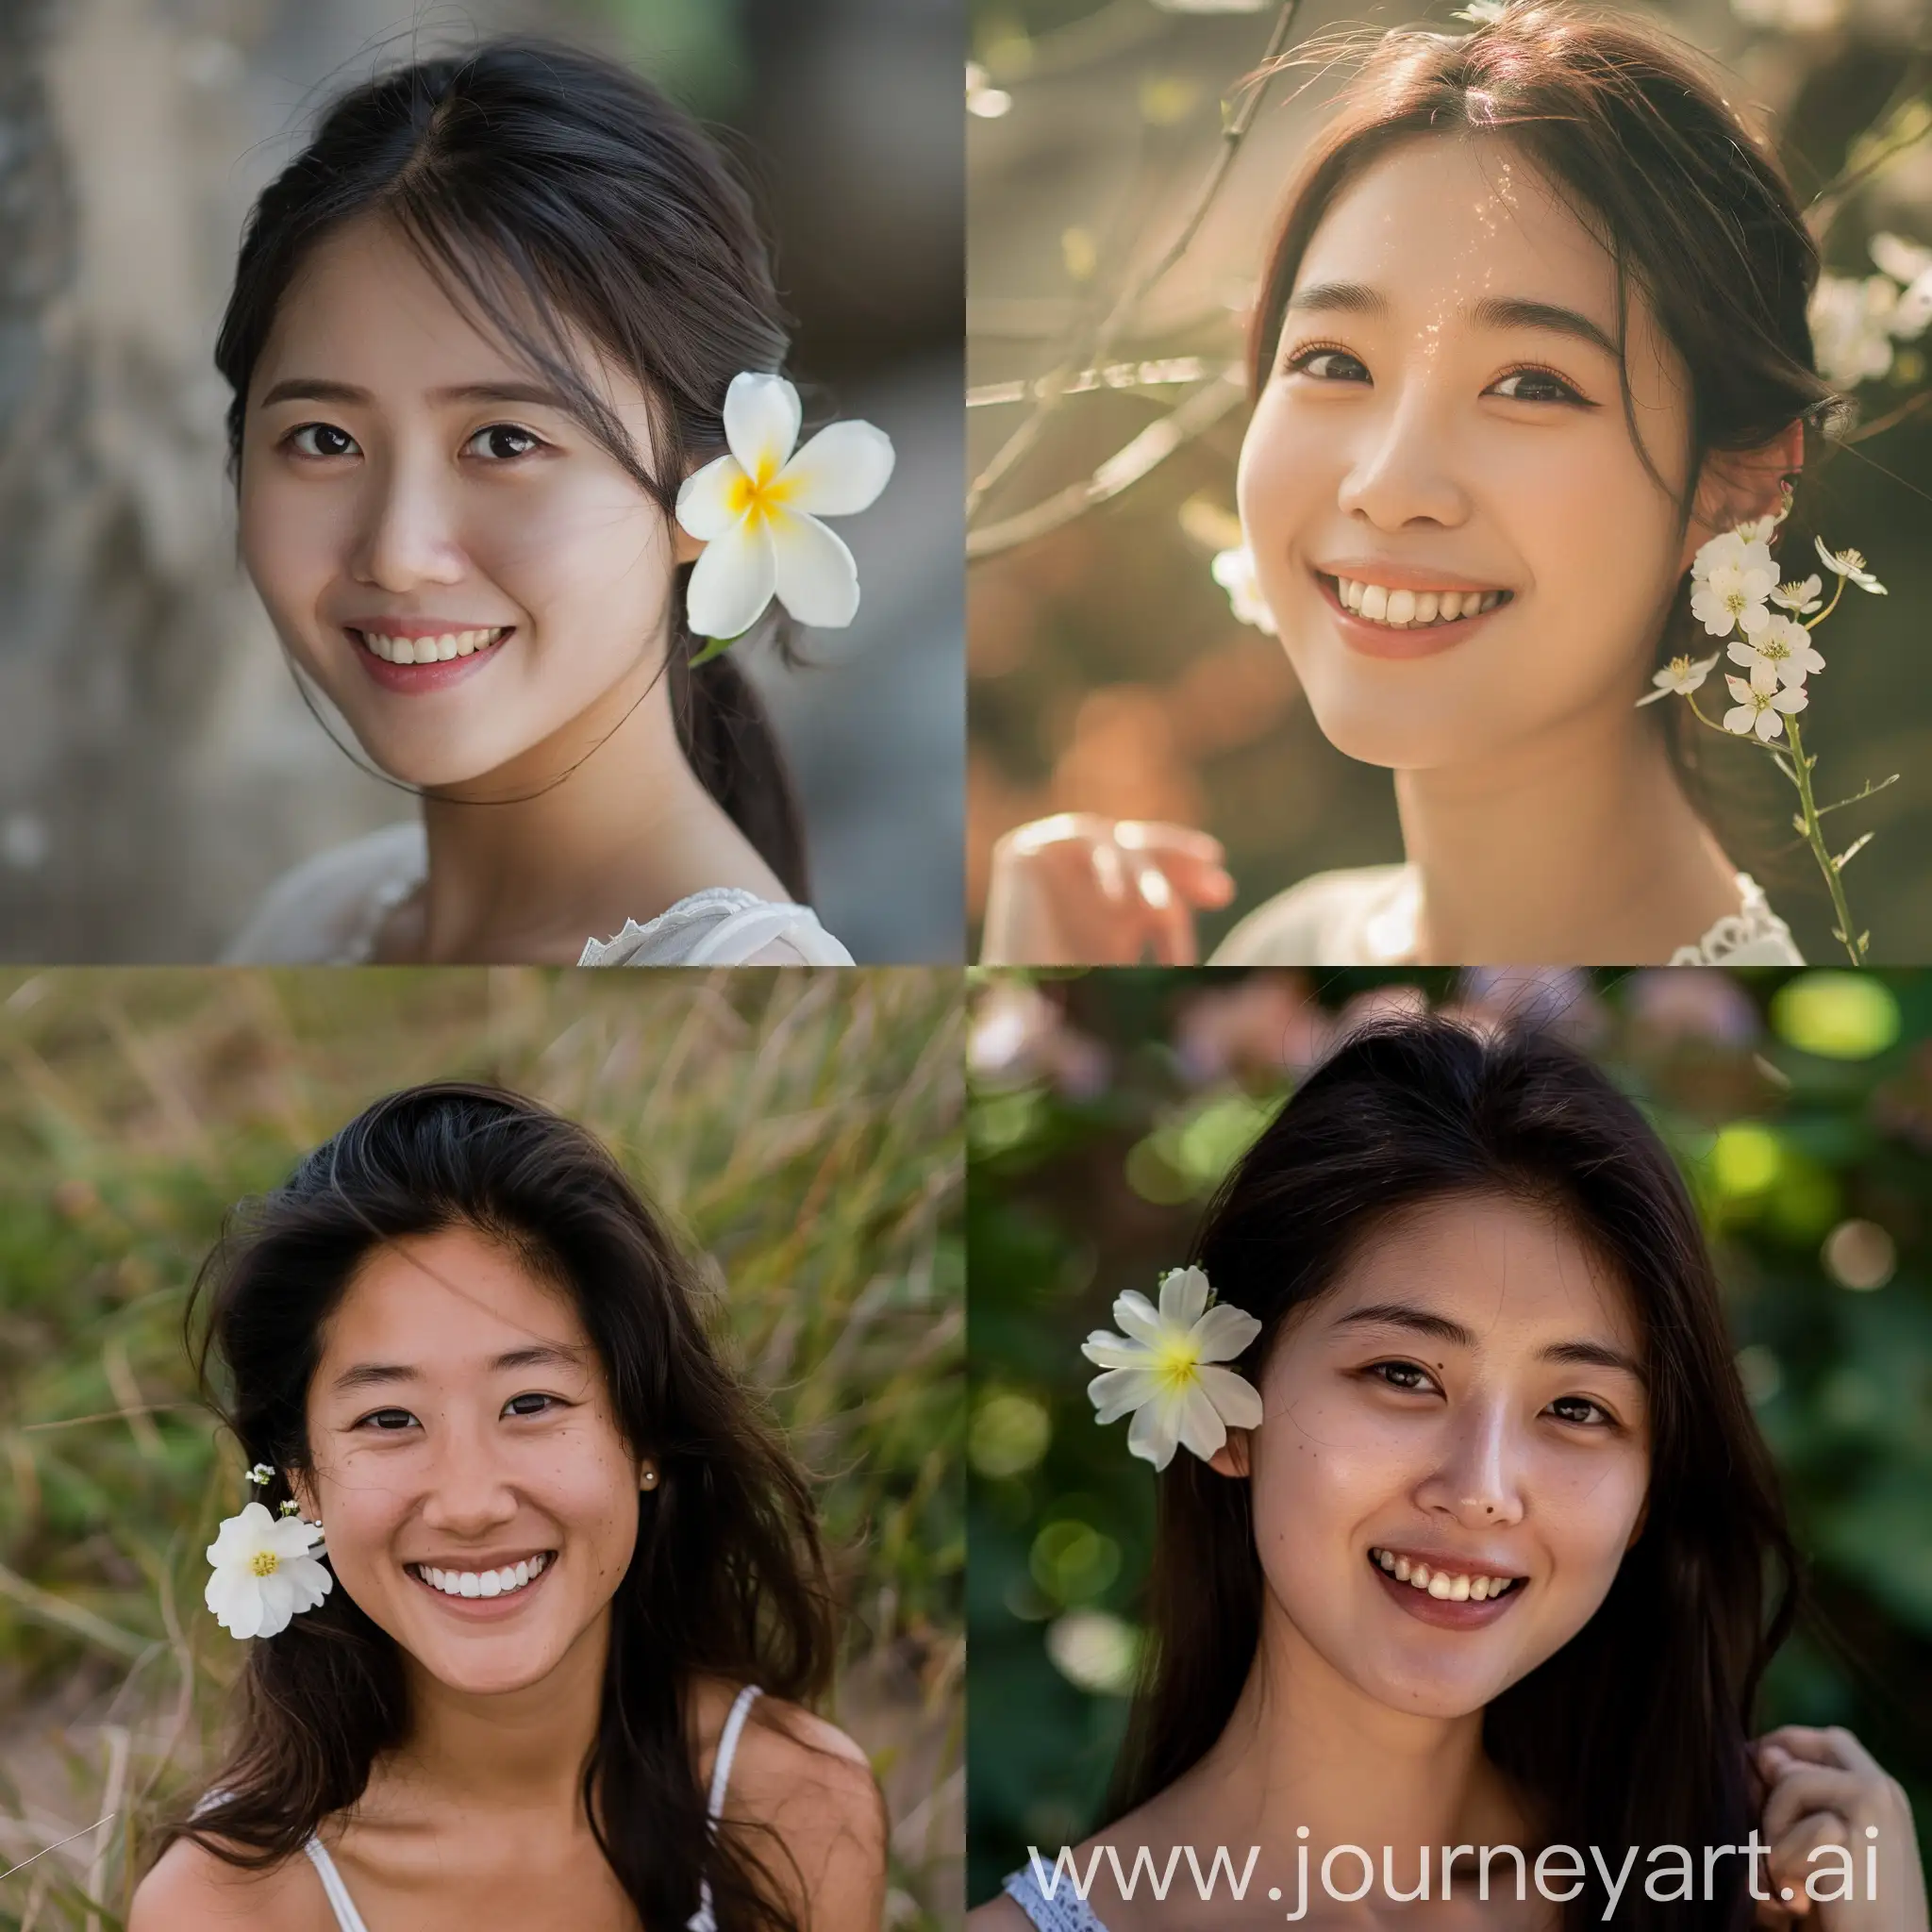 Smiling-Asian-Woman-with-Flower-in-Ear-Portrait